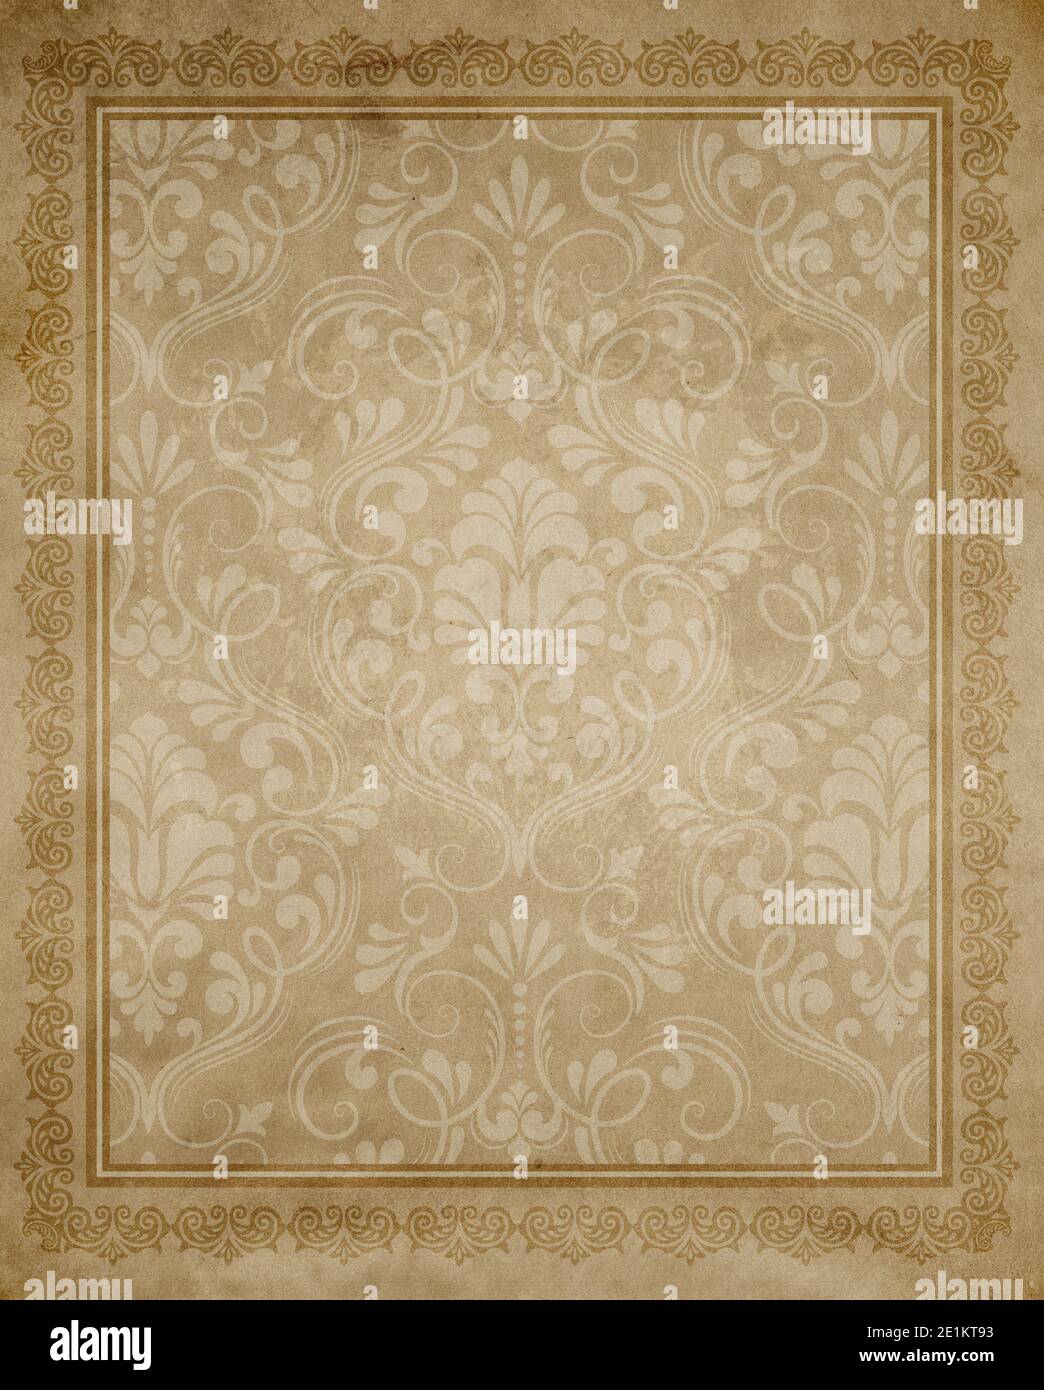 Antique Paper Background Stock Photo - Download Image Now - Antique, Bad  Condition, Blank - iStock